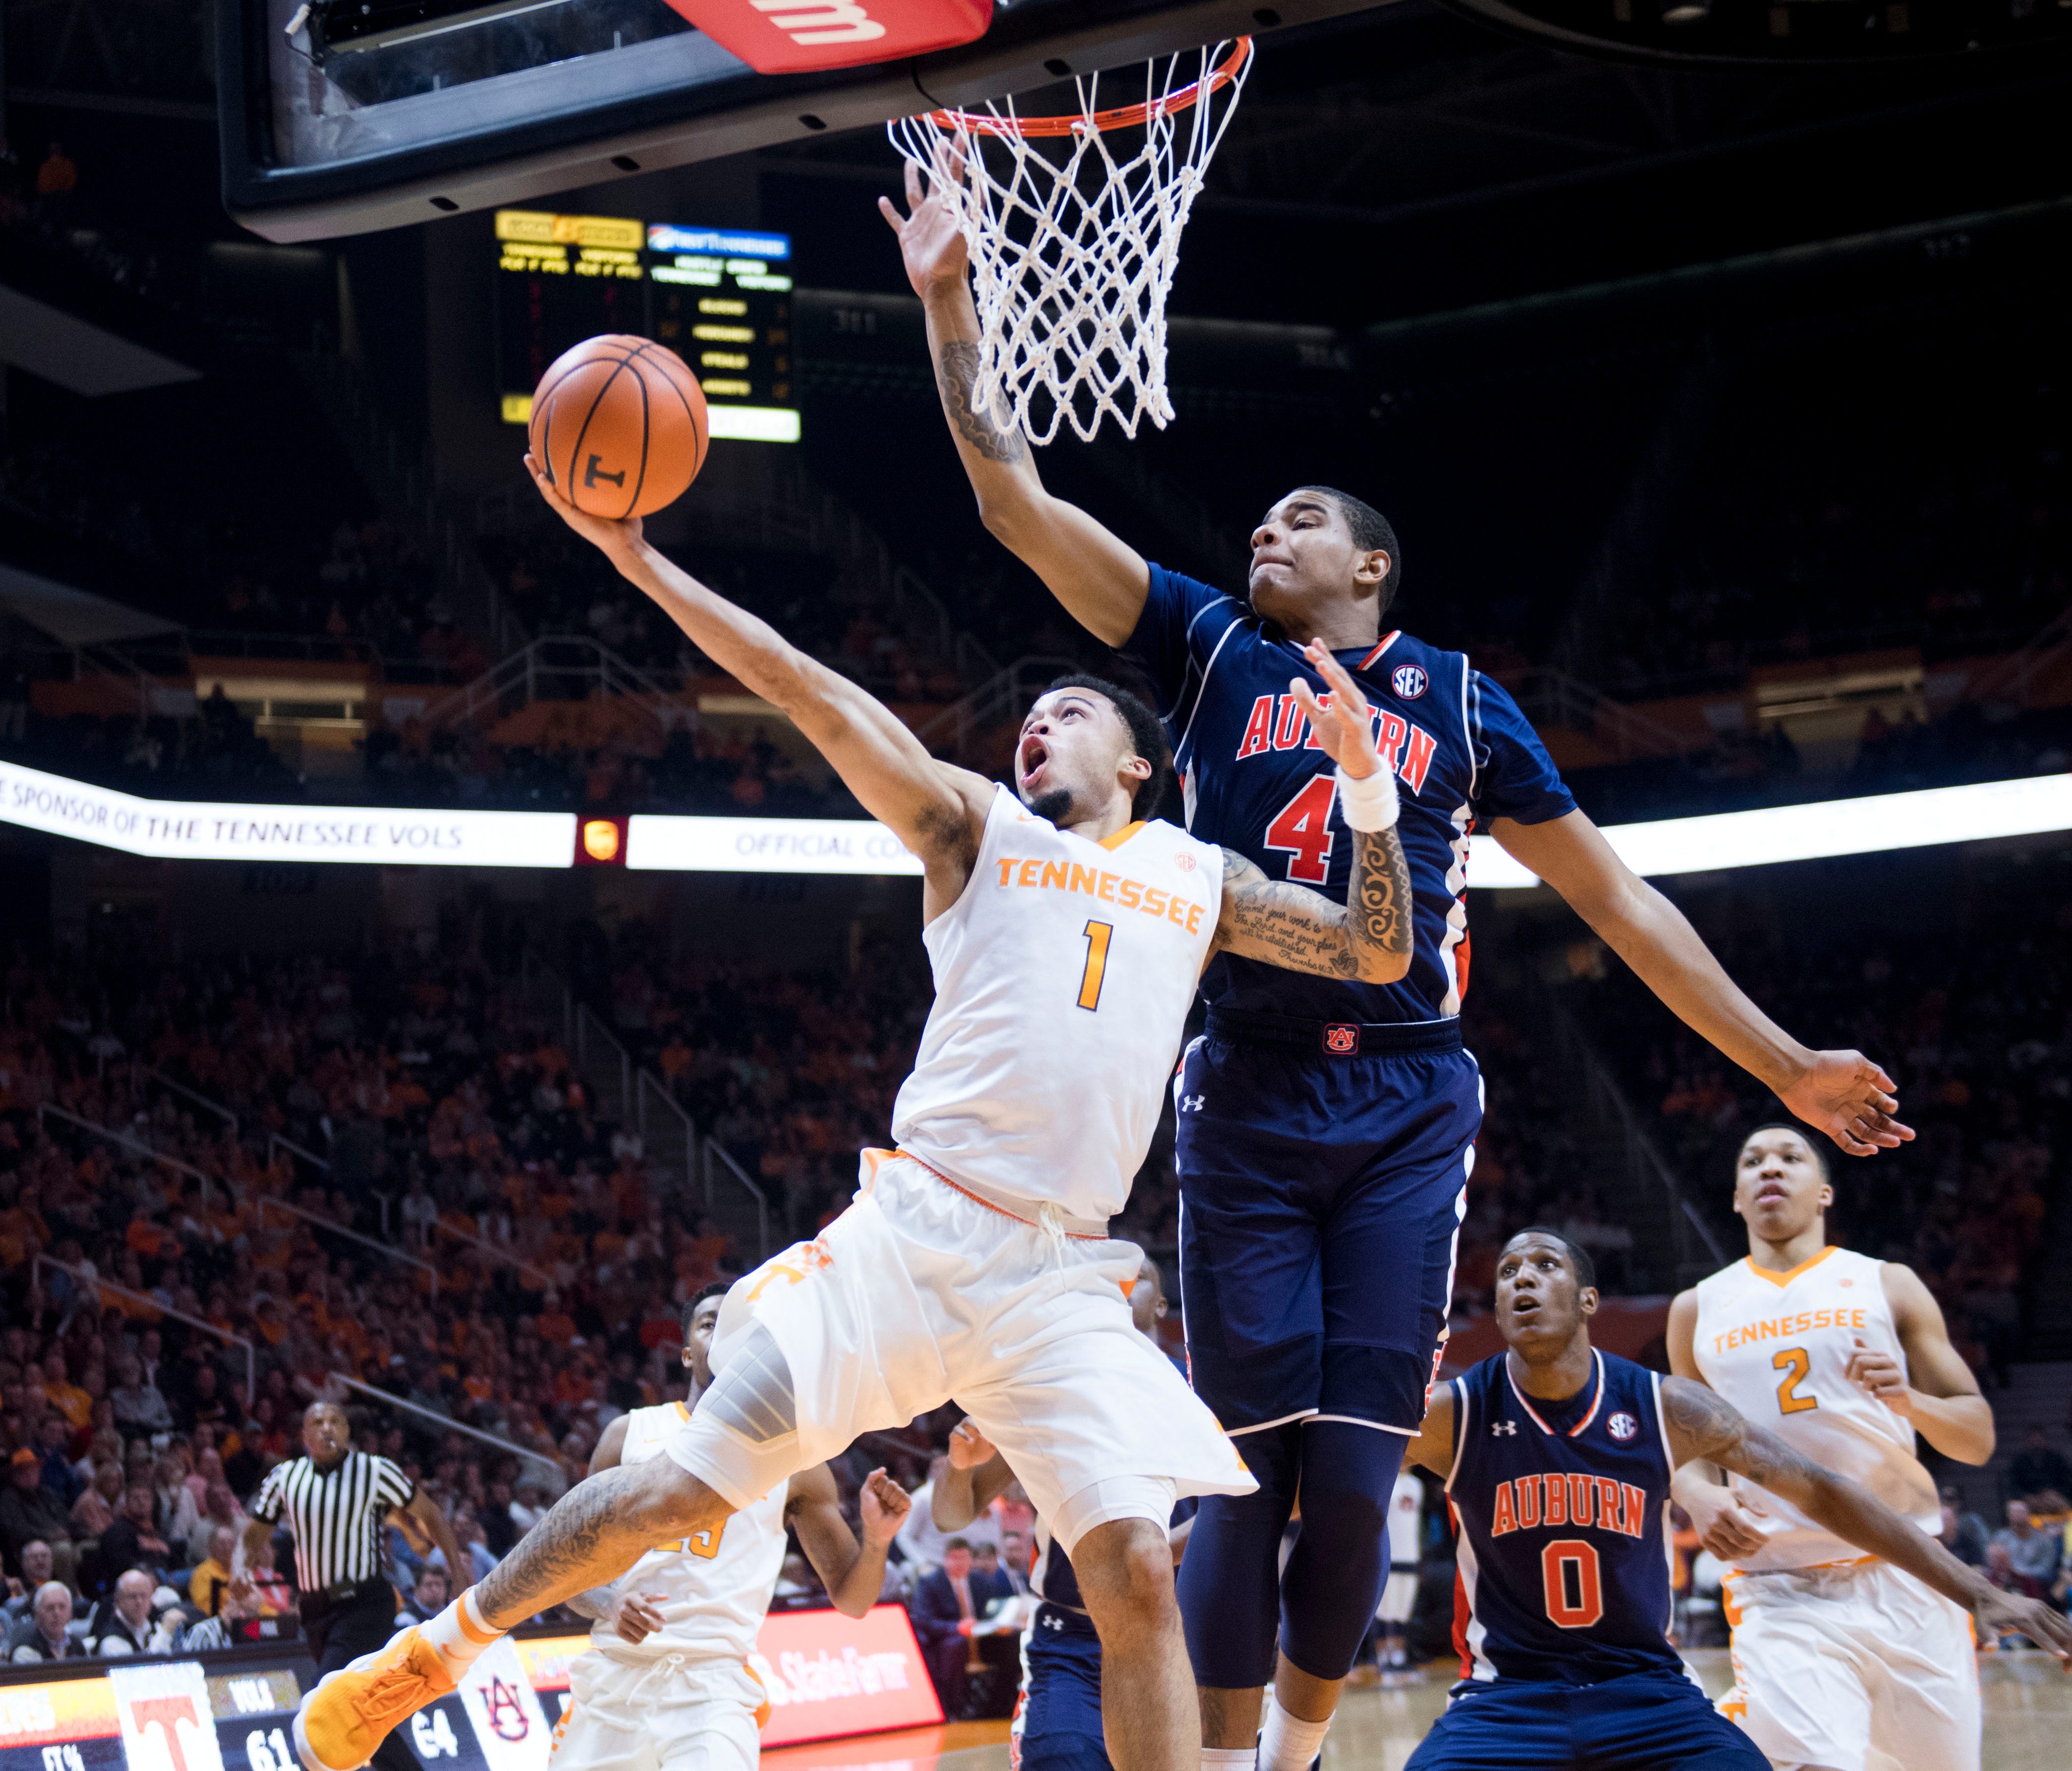 Tennessee's Lamonté Turner attempts to score while defended by Auburn's Chuma Okeke.